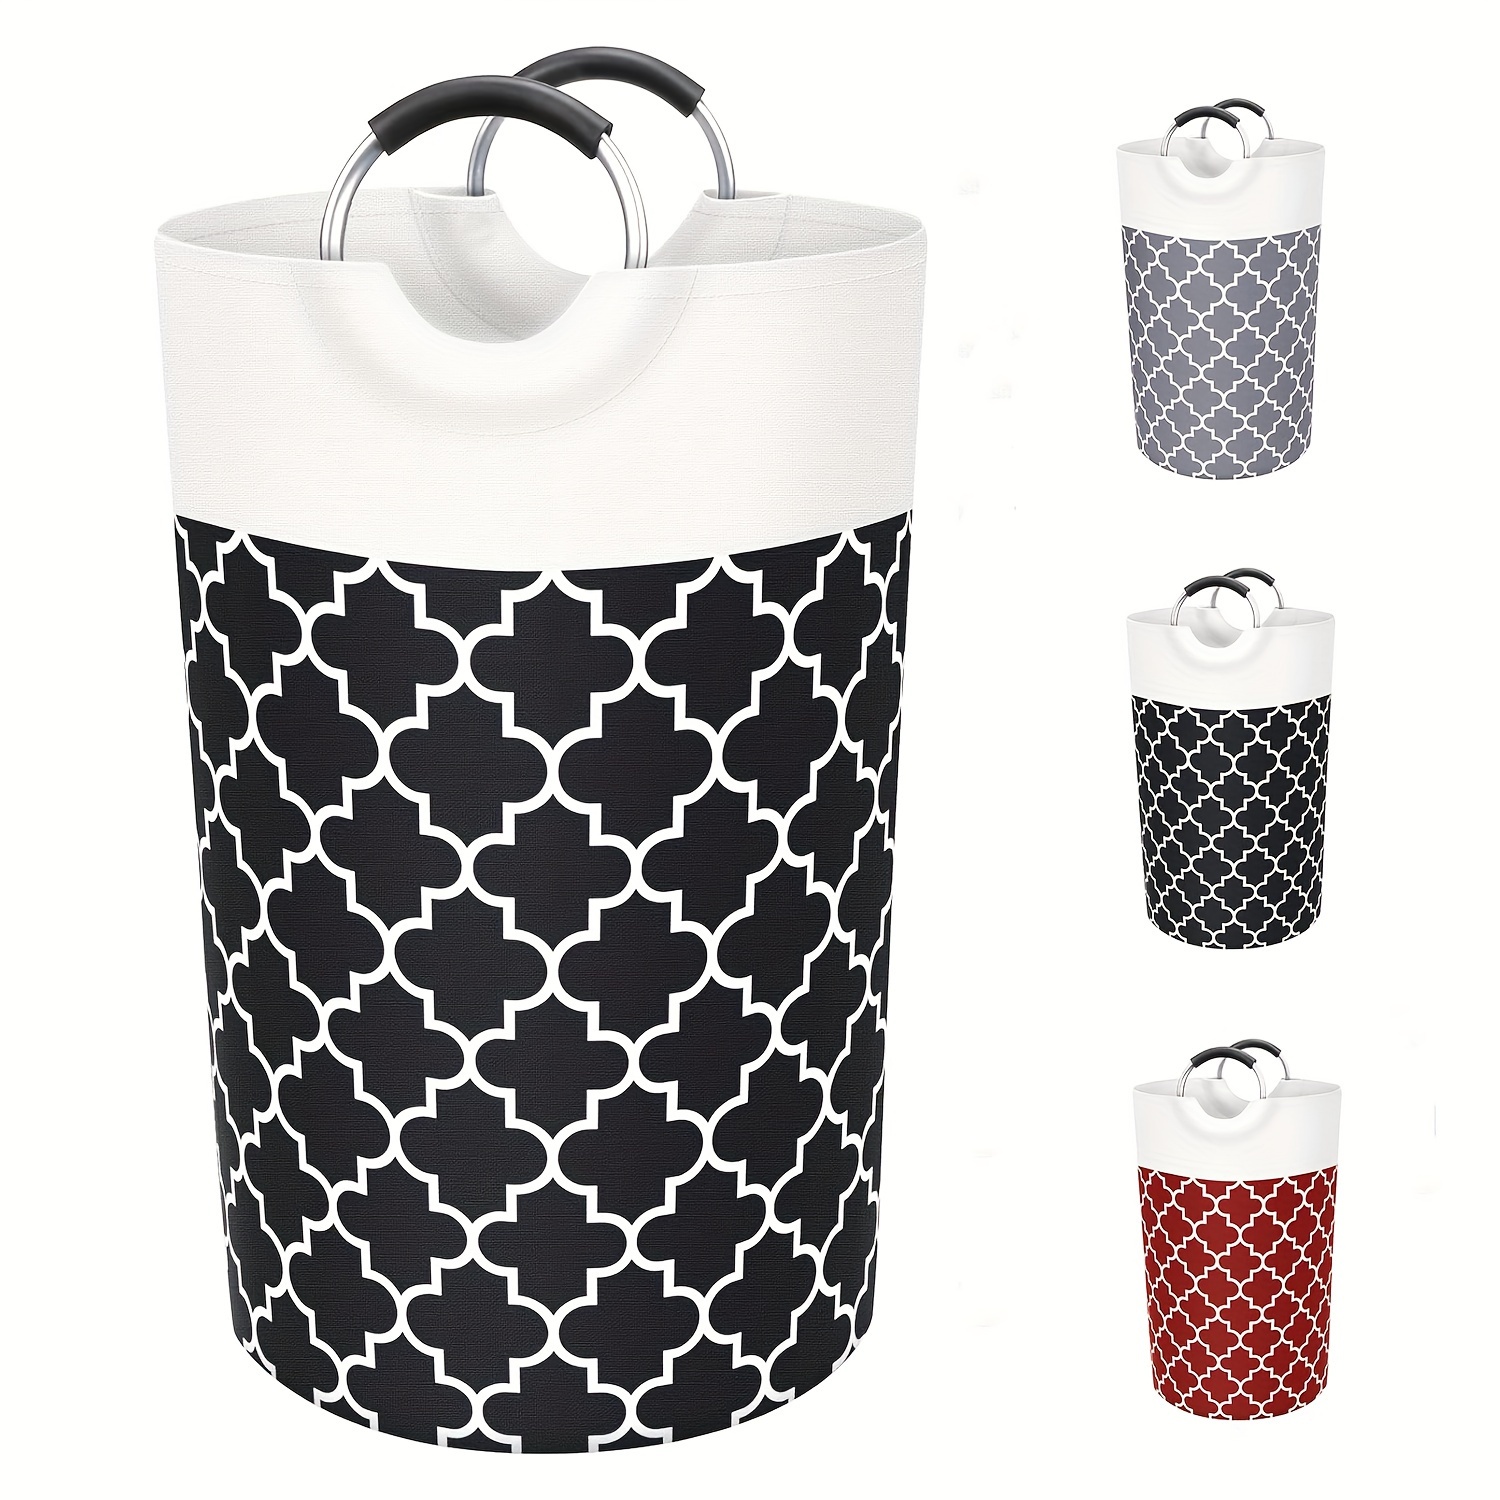 

1pc Large Laundry Basket, Laundry Washing Clothes Bag, Collapsible Bag With Handles, College Essentials Storage Bag